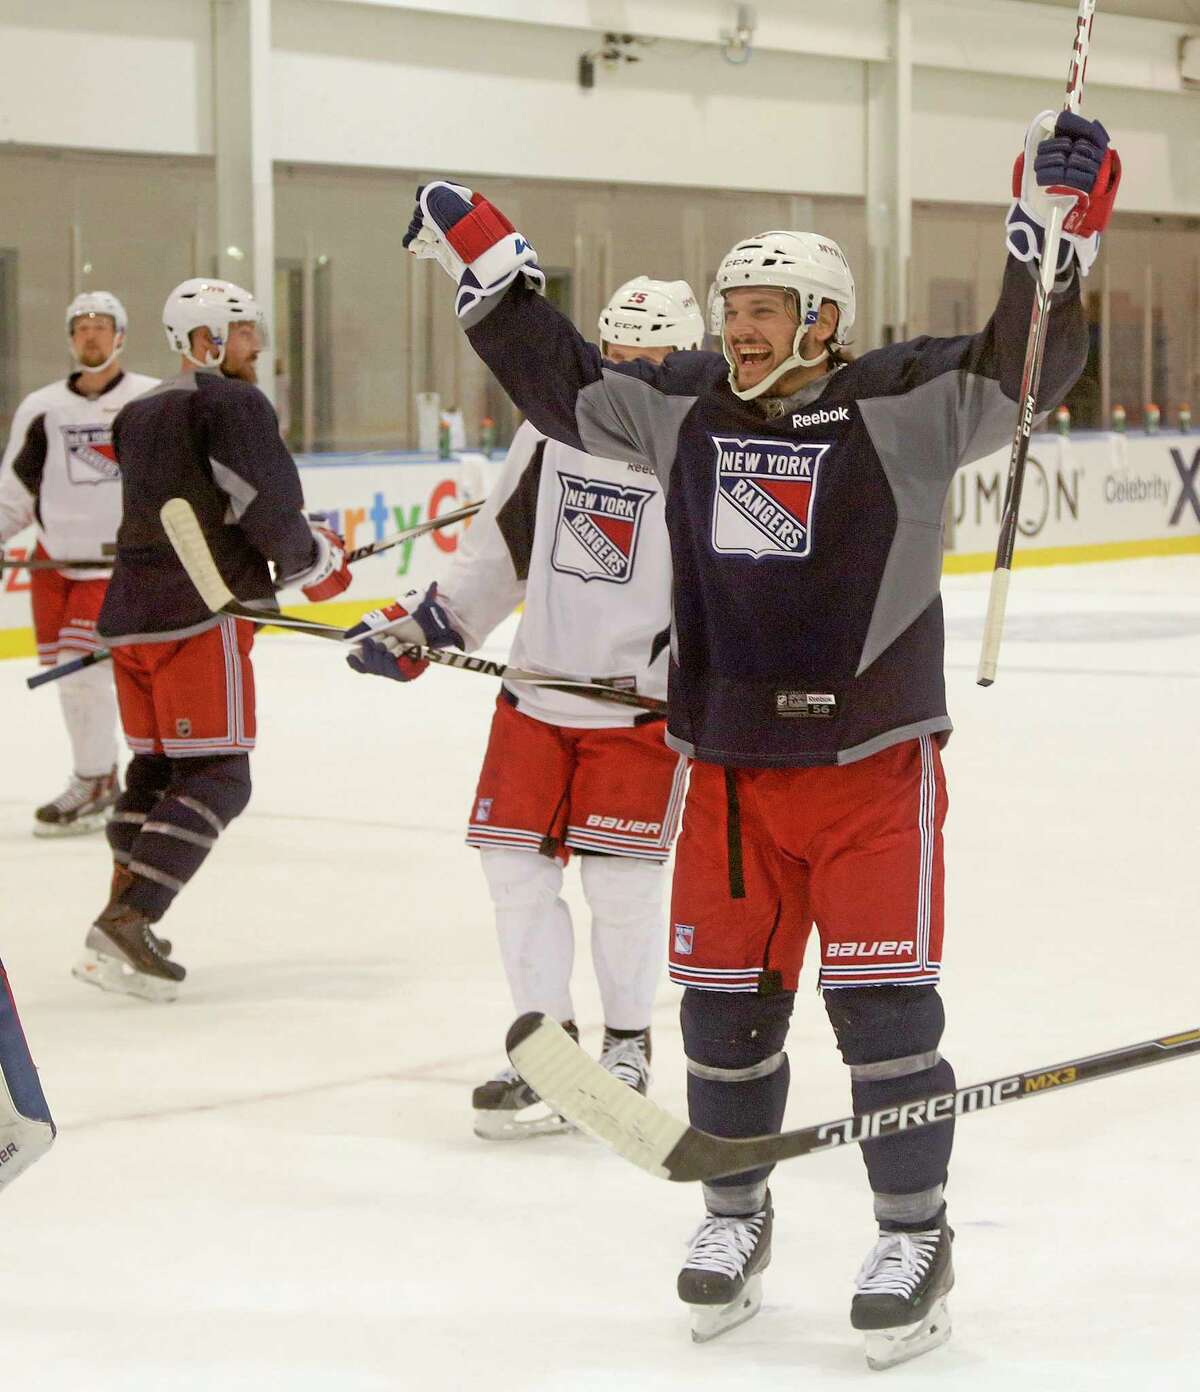 New York Rangers left wing Daniel Carcillo reacts after a goal scored during Monday’s practice in Greenburgh, New York. The Rangers will face the Los Angeles Kings in Game 1 of Stanley Cup finals on Wednesday in Los Angeles.